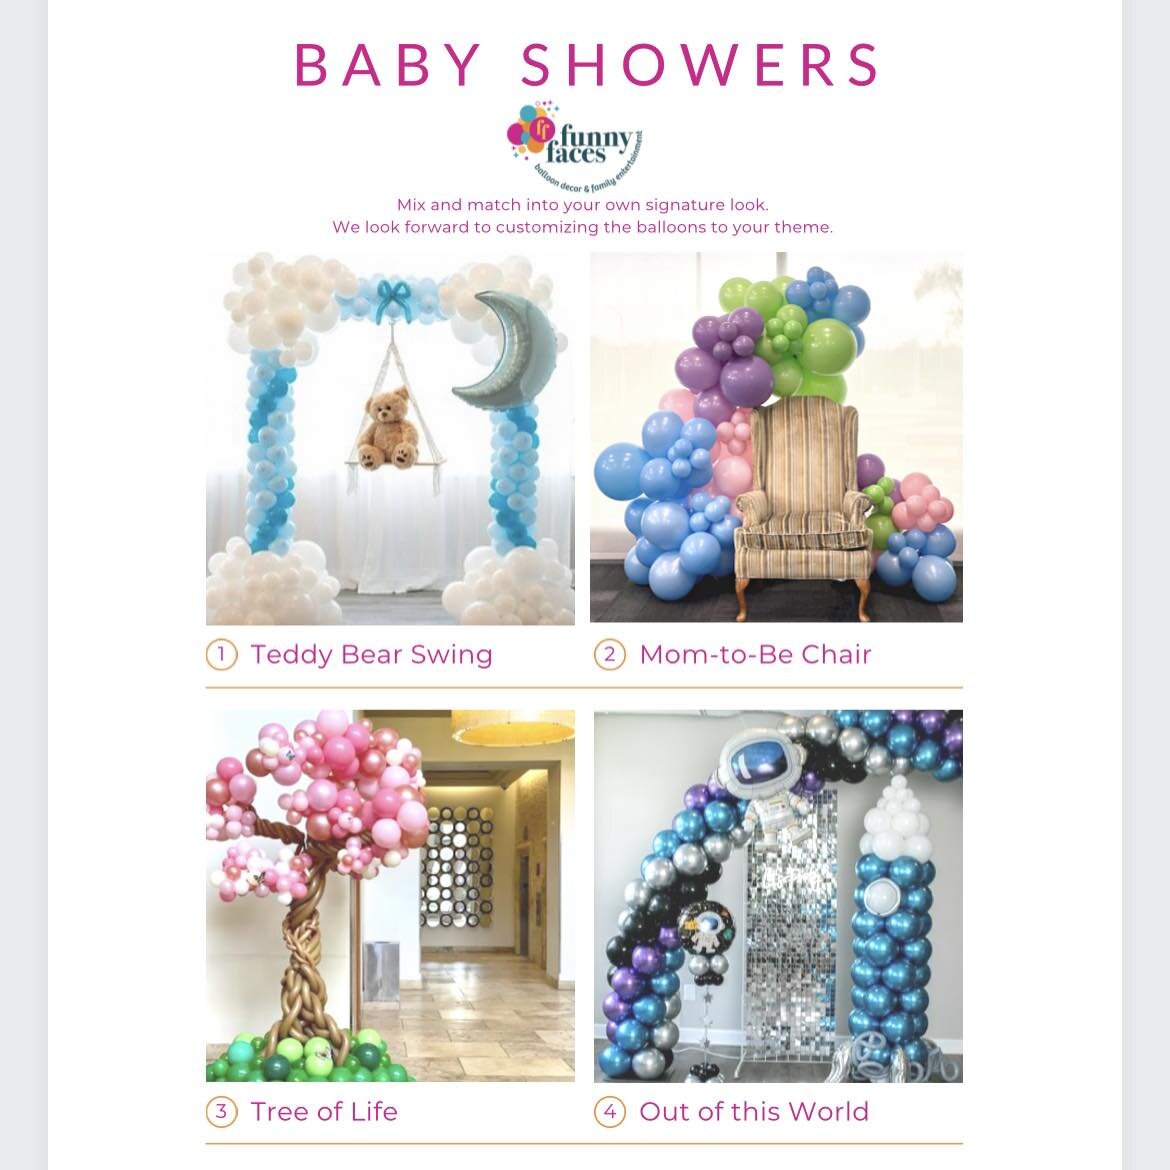 It&rsquo;s baby shower time! And we&rsquo;d love to help you make your day amazing!